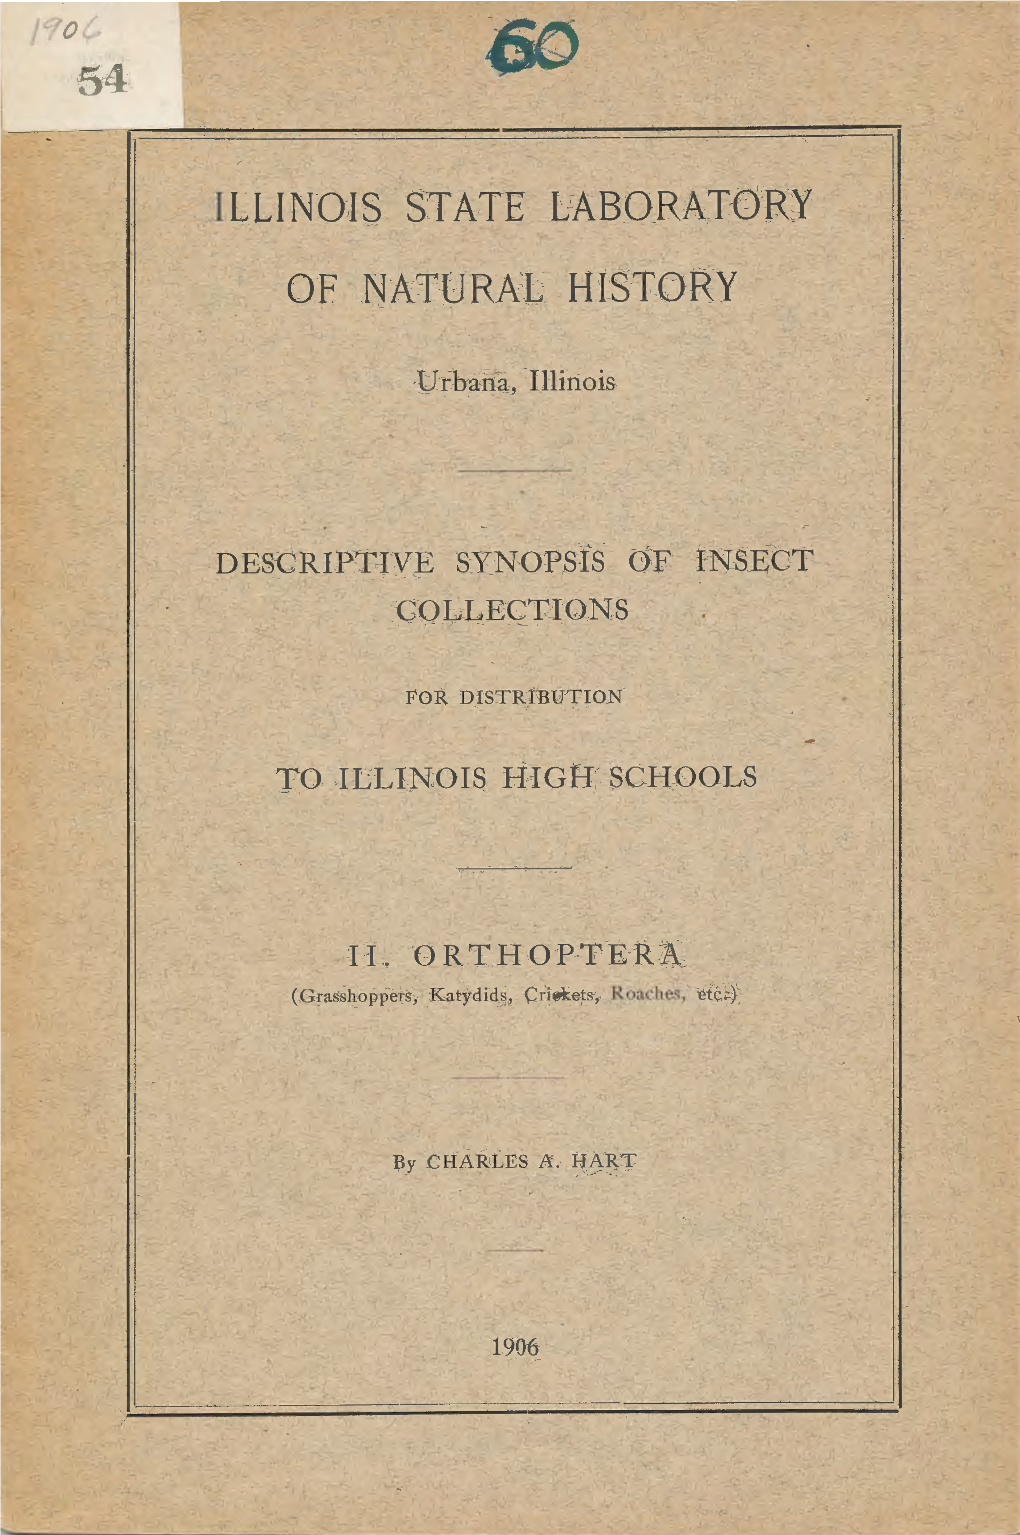 Descriptive Synopsis of Insect Collections.Pdf